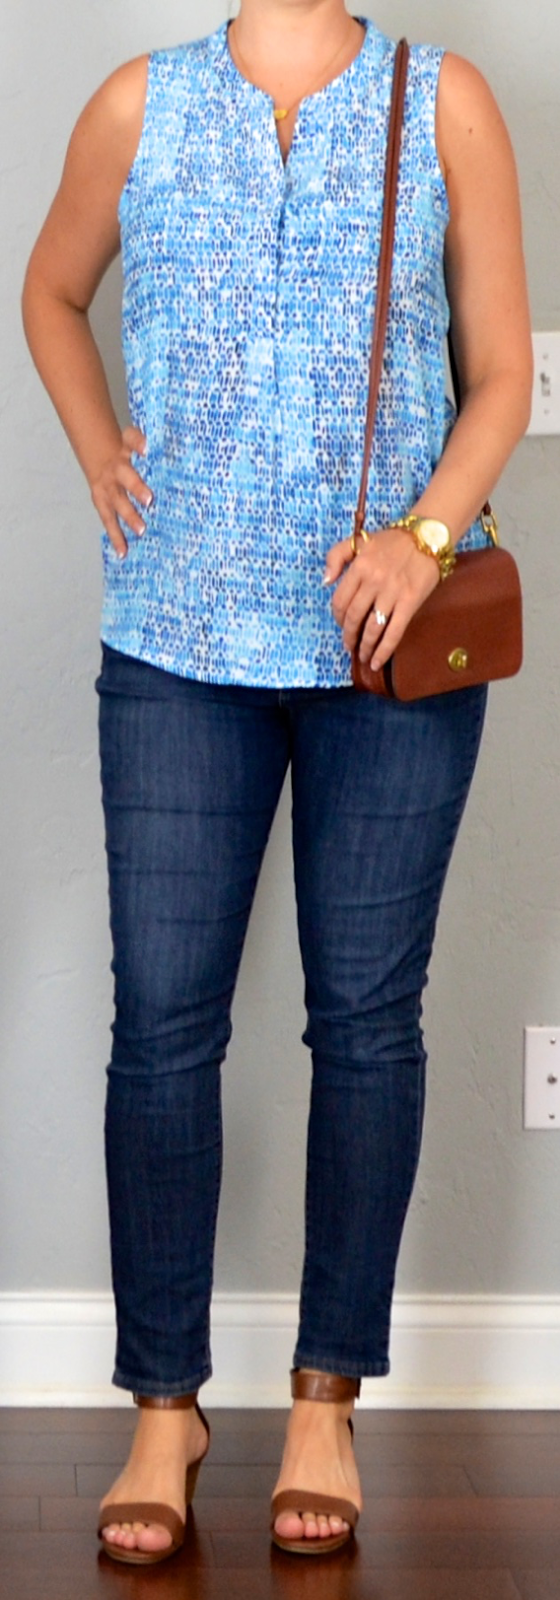 outfit post: blue print blouse, skinny jeans, brown wedge sandals